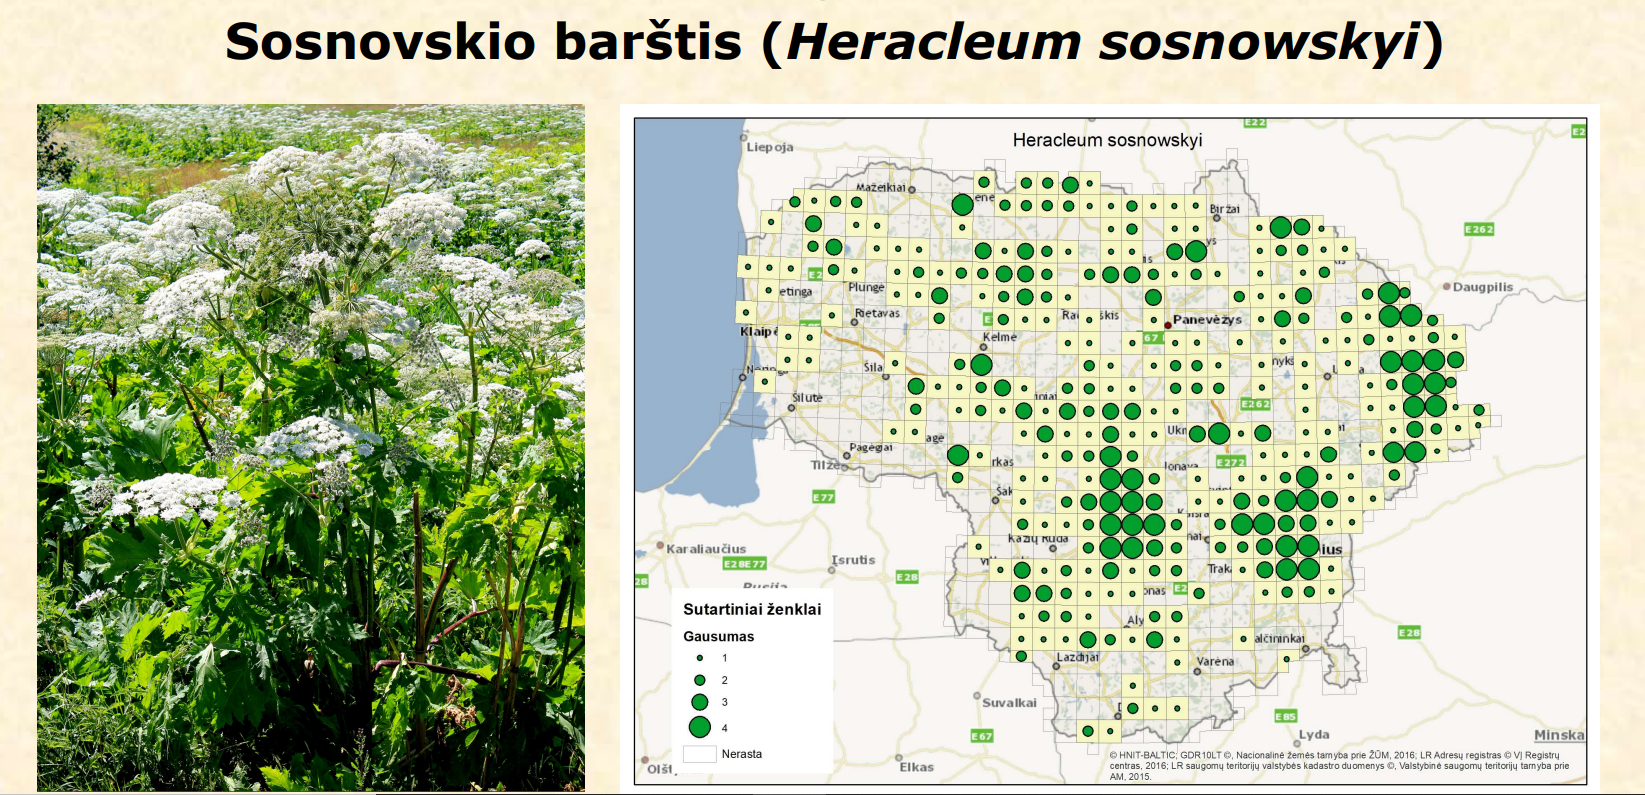 Bild of a invasive species (plant) and a map describing where it can be found.